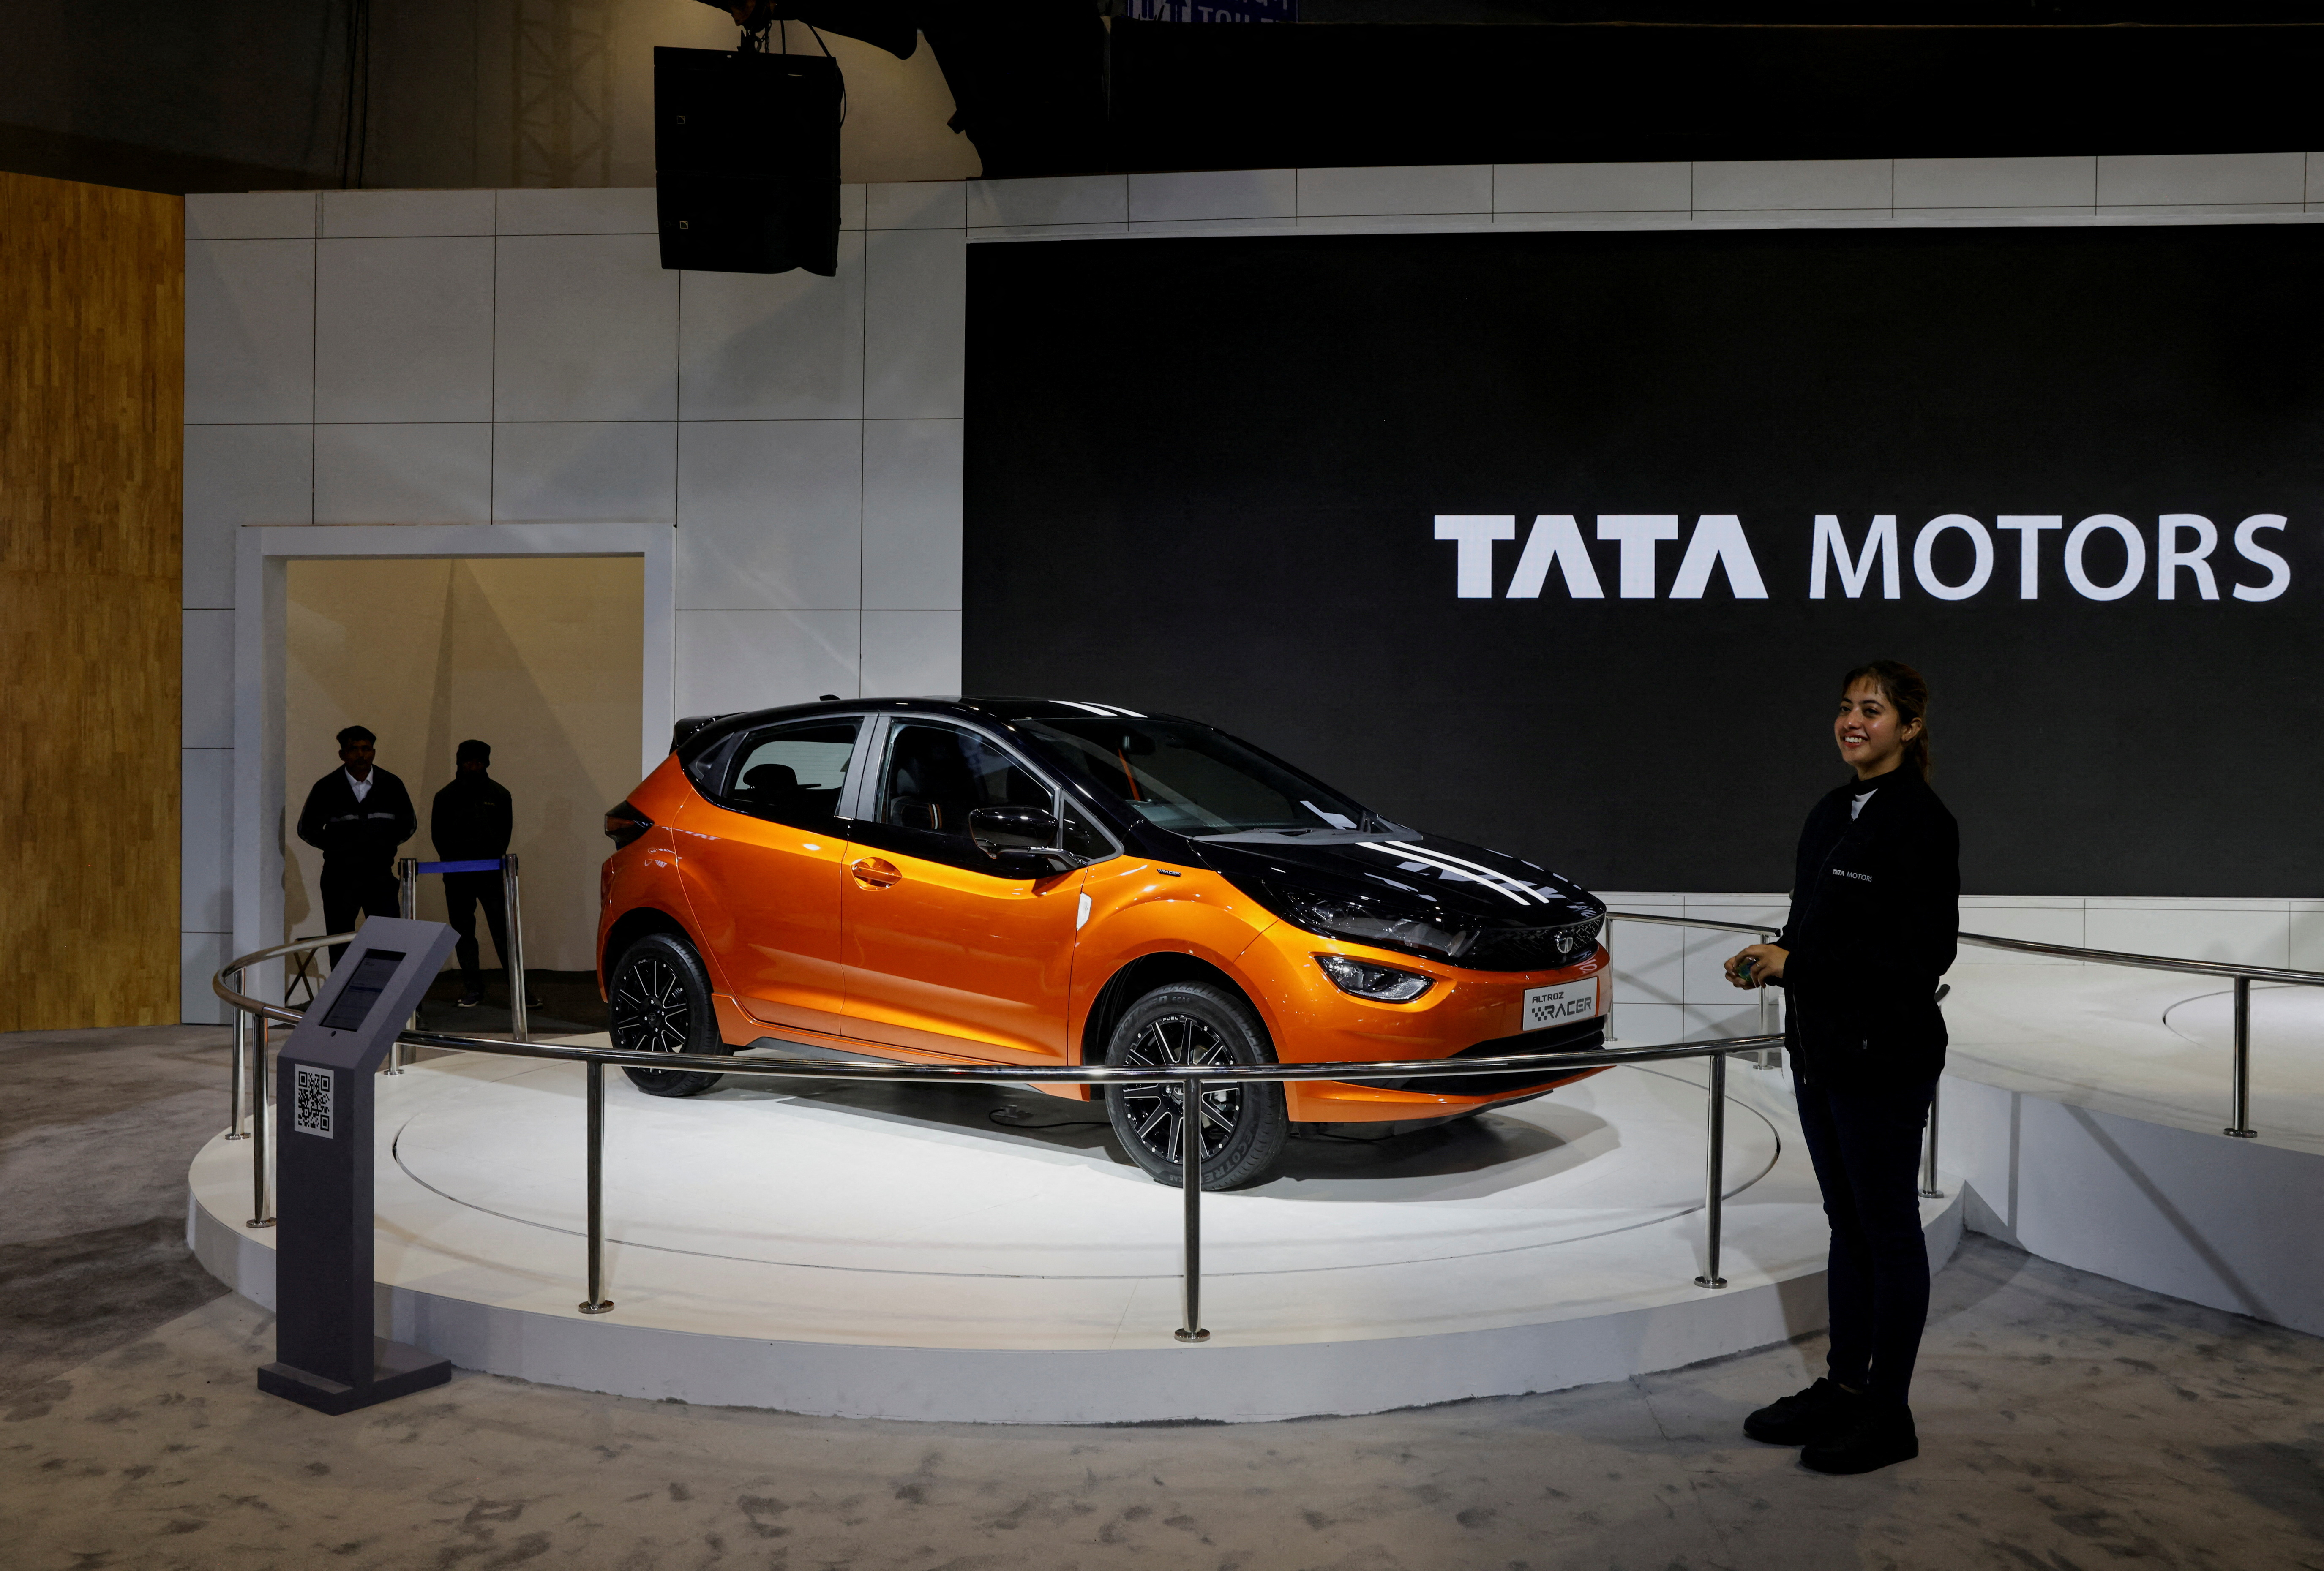 Tata Motors' Altroz Racer is seen on display at Bharat Mobility Global Expo organised by India's commerce ministry at Pragati Maidan in New Delhi